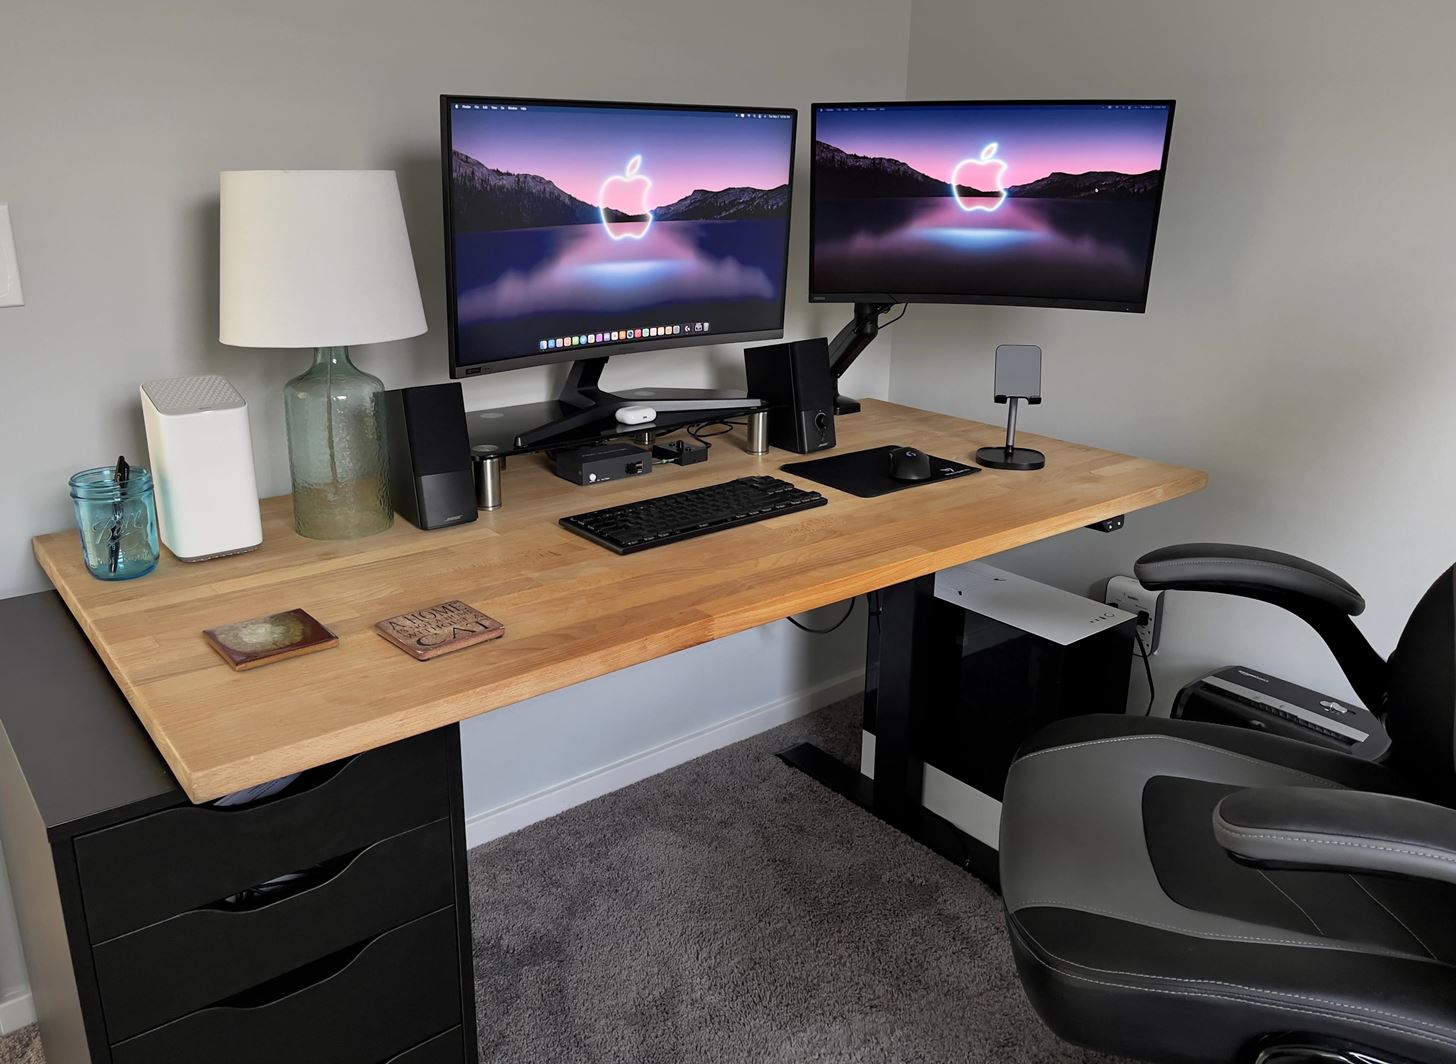 The Flexispot E7 Pro Plus Electric Standing Desk Is Great for Any Home Office